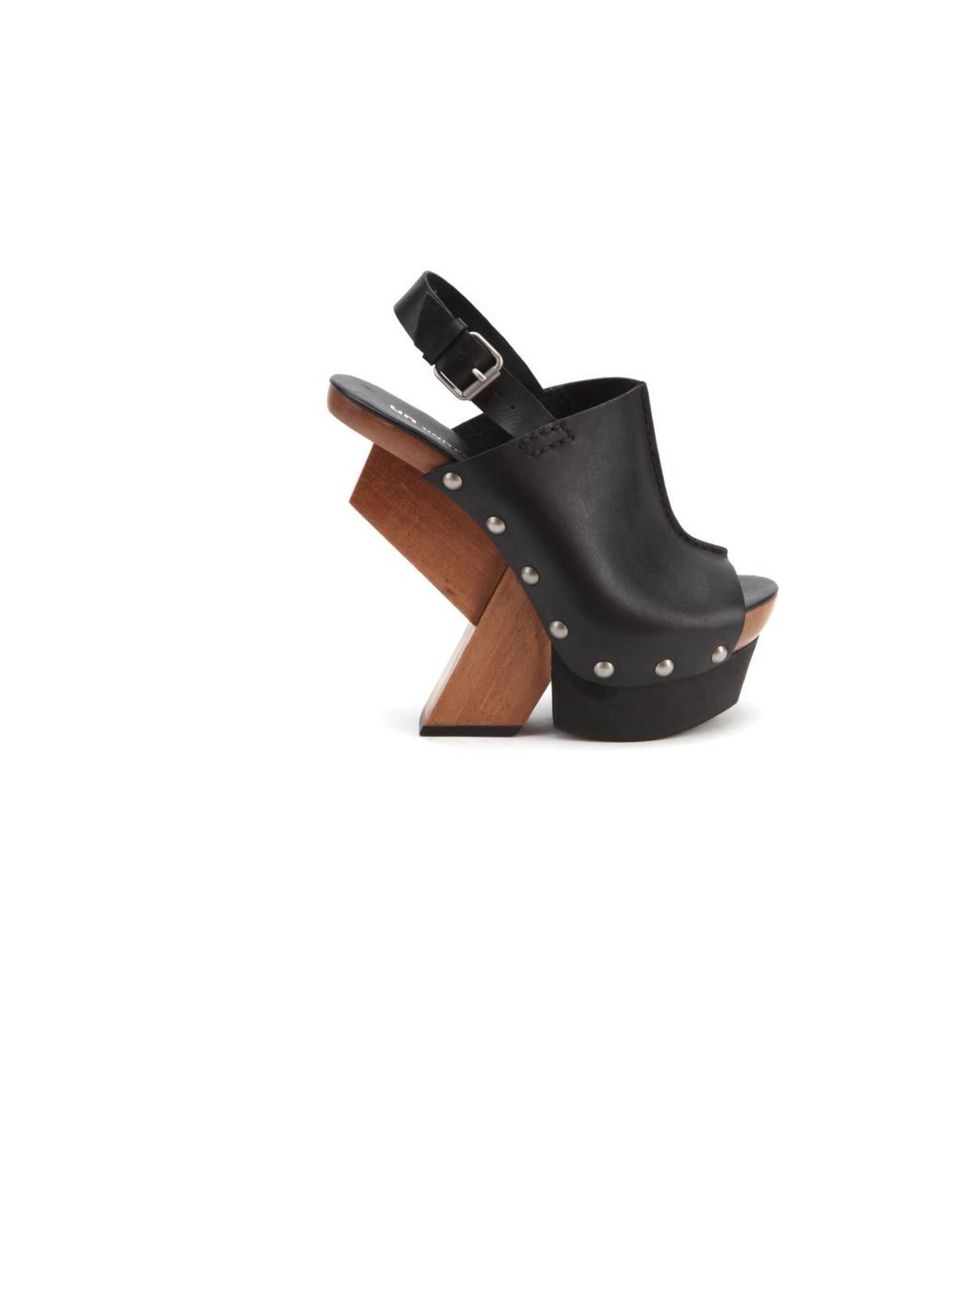 <p>United Nude 'Abstract Clog Hi' heels, £225, for stockists call 0207 240 7160</p>